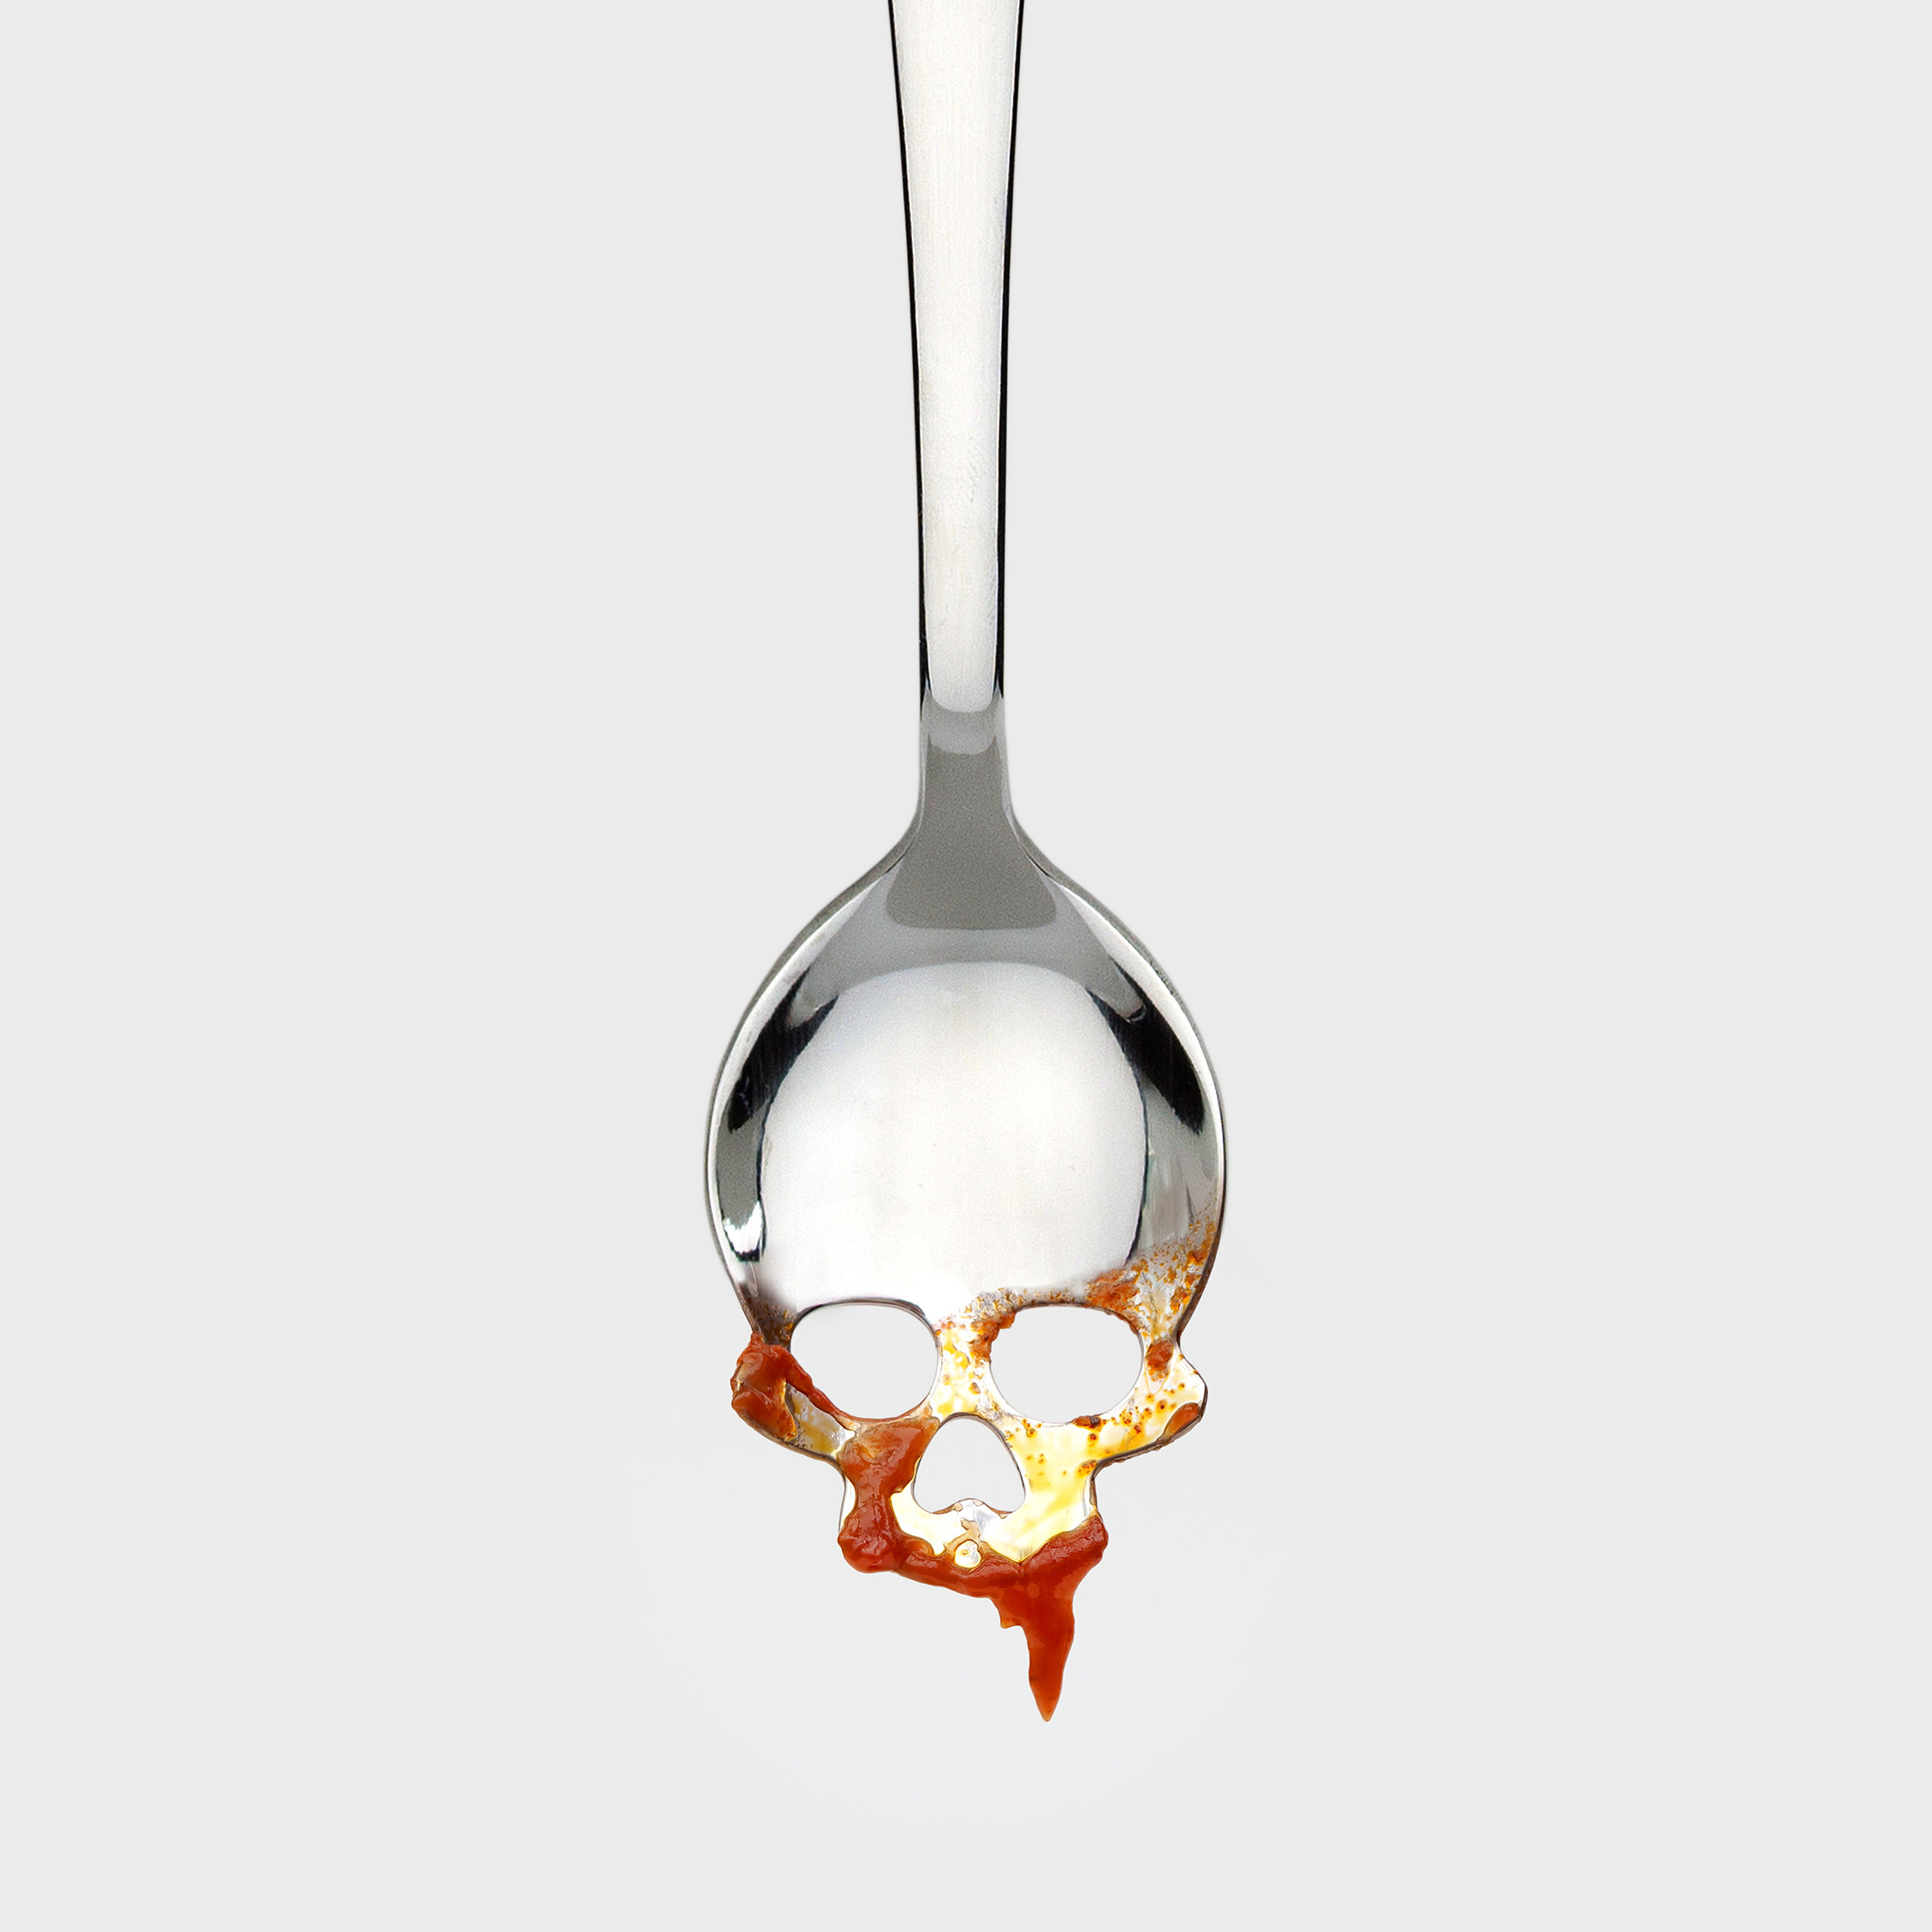 Skull dripping with Sauce